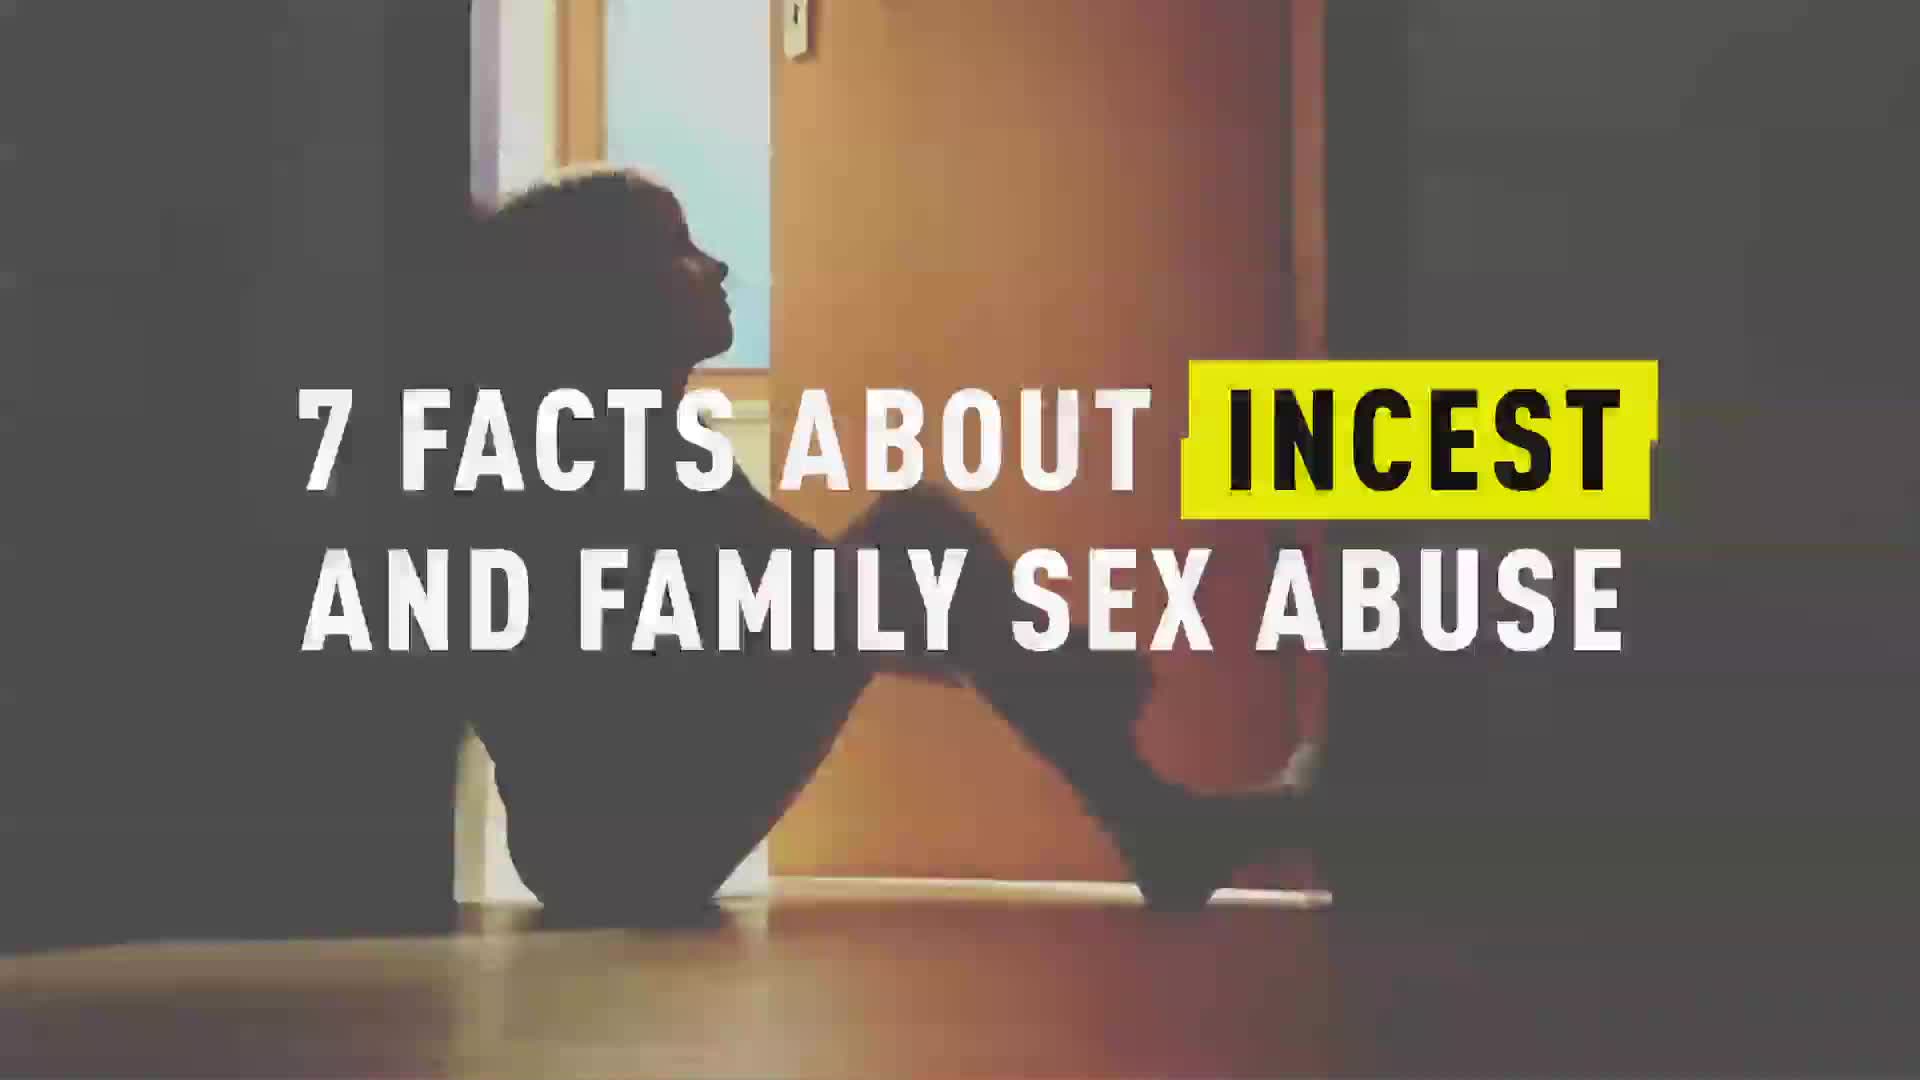 Parents Family Incest Sex - 7 Facts About Incest and Family Sex Abuse